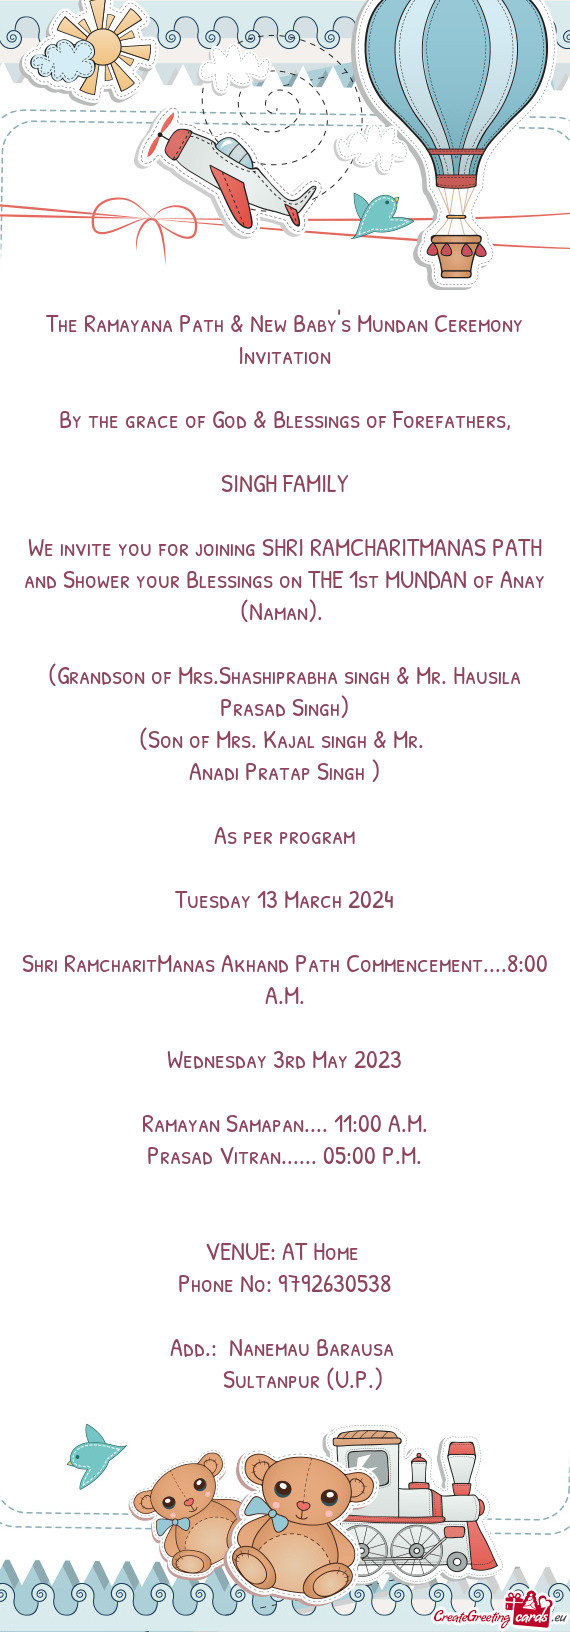 We invite you for joining SHRI RAMCHARITMANAS PATH and Shower your Blessings on THE 1st MUNDAN of An